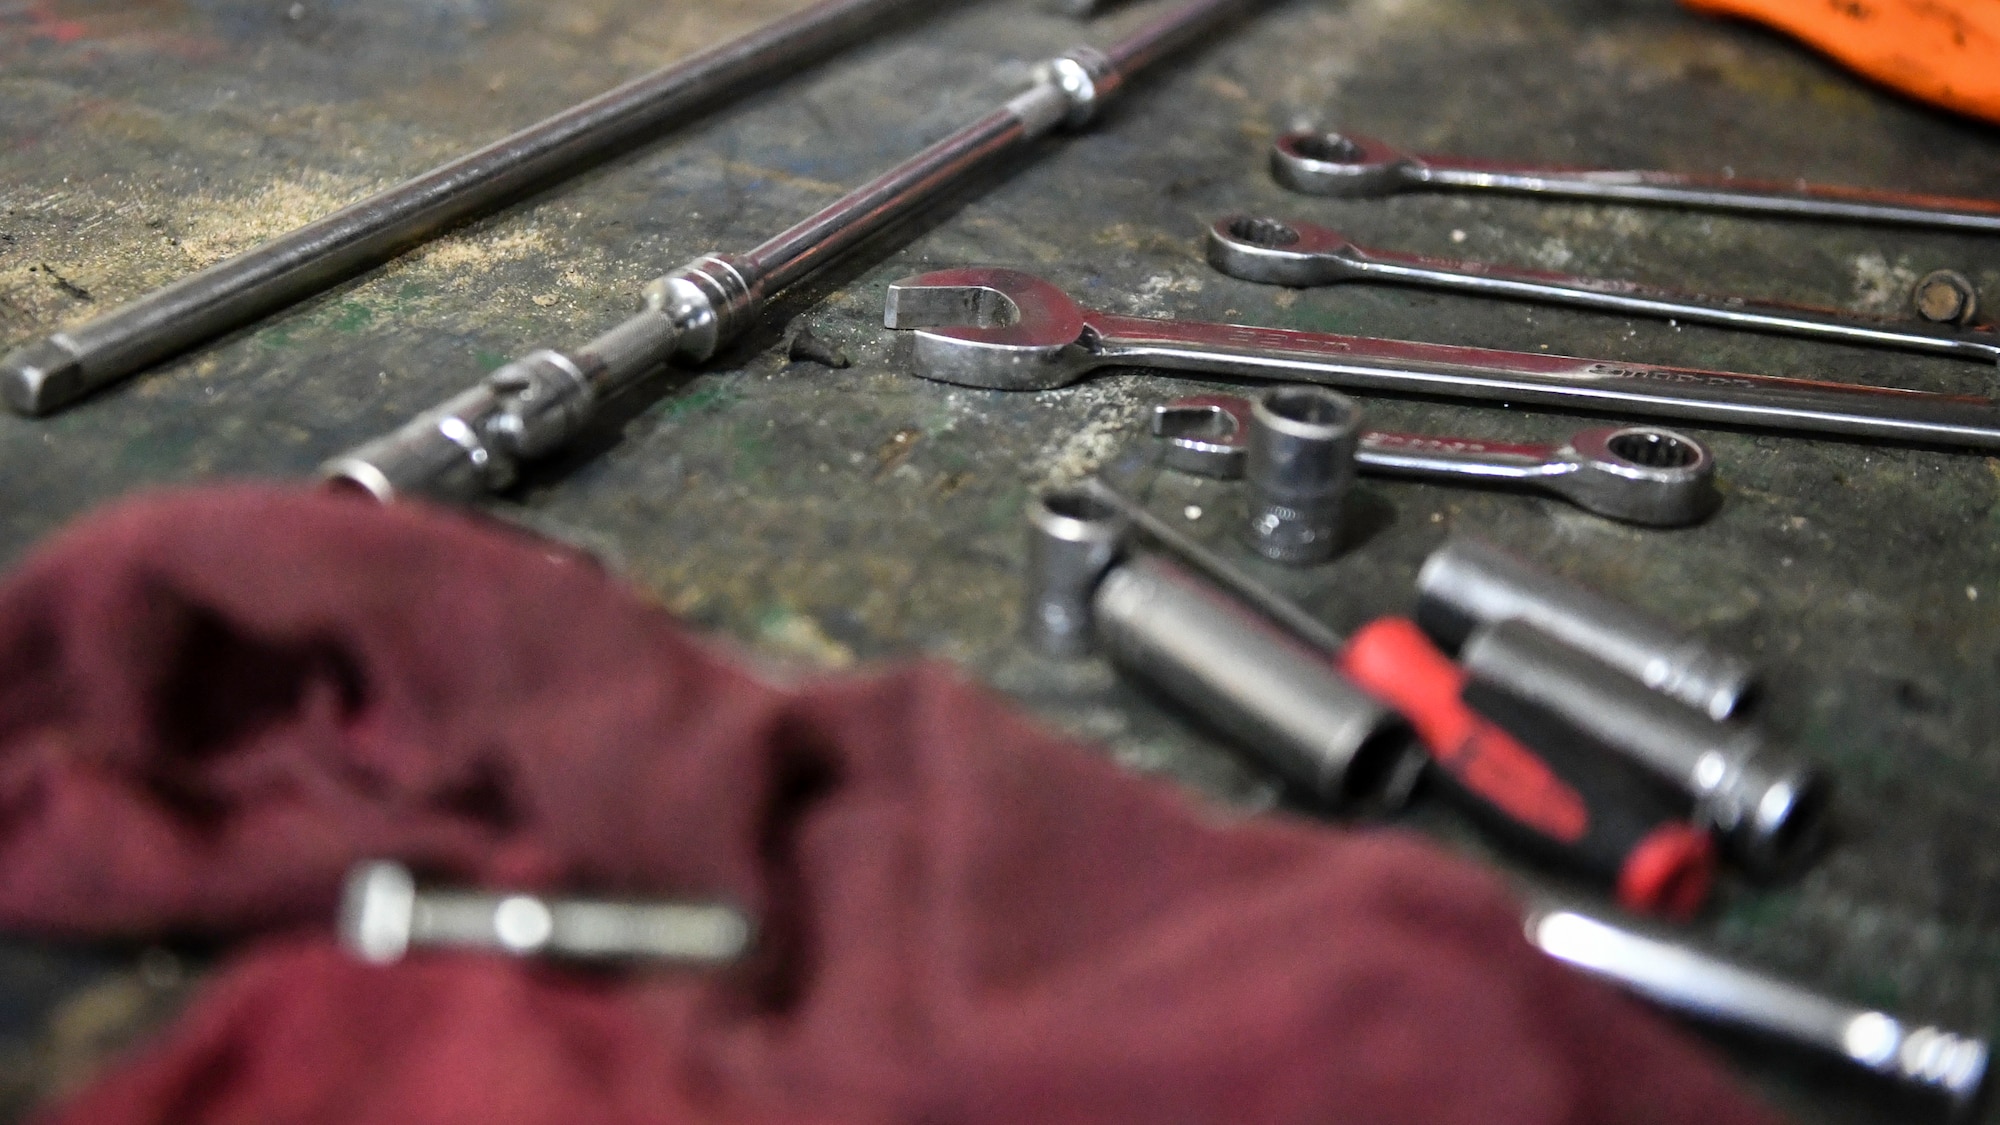 Tools are lined up before a driveshaft installation at the vehicle maintenance shop on Ali Al Salem Air Base, Kuwait, July 29, 2019. The 386th Expeditionary Logistics Readiness Squadron vehicle maintenance shop is home to over 41 Airmen designated to maintain vehicles and equipment crucial to provide deterrence and stability to the U.S. Central Command area of responsibility. (U.S. Air Force photo by Staff Sgt. Mozer O. Da Cunha)